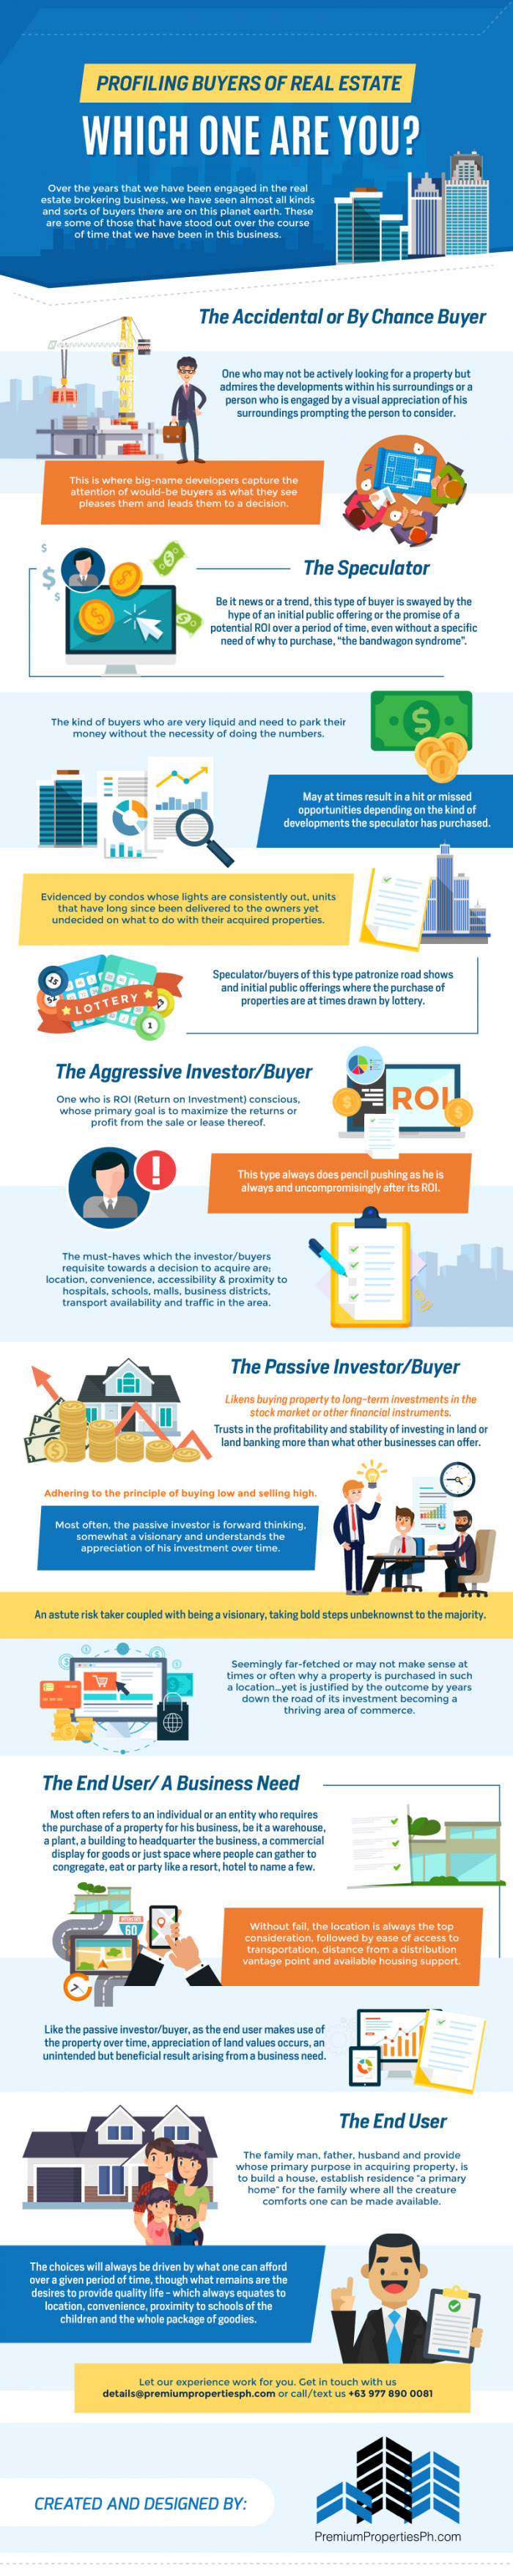 Profiling Buyers of Real Estate: Which One Are You?